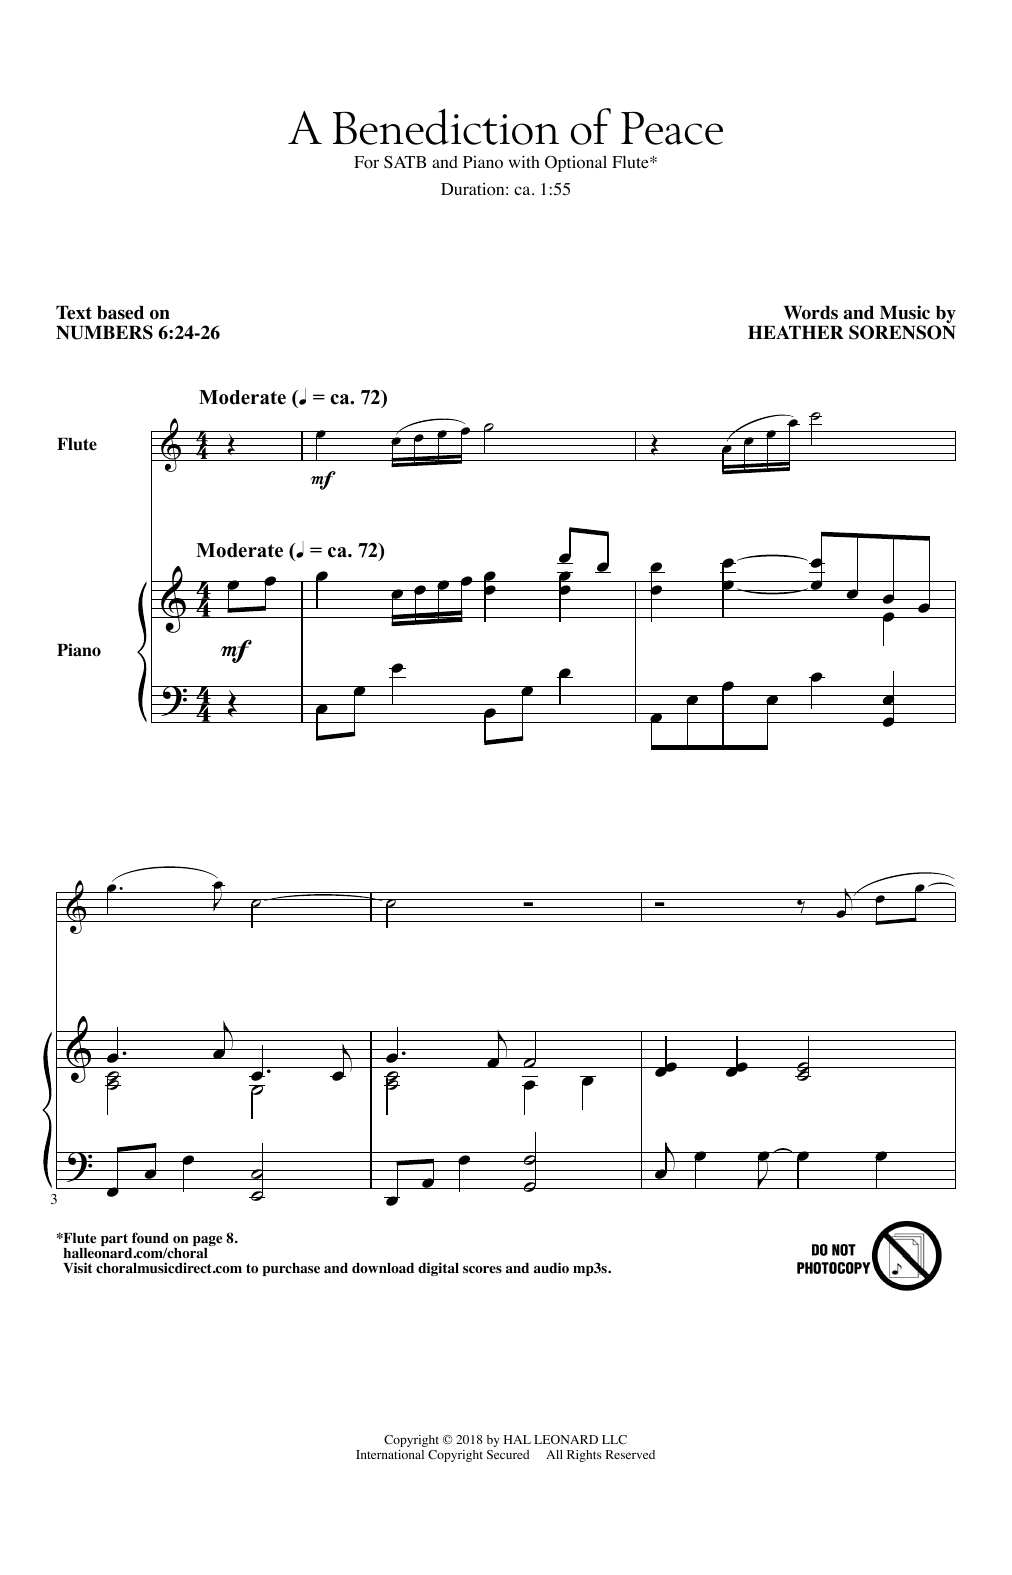 Download Heather Sorenson A Benediction Of Peace Sheet Music